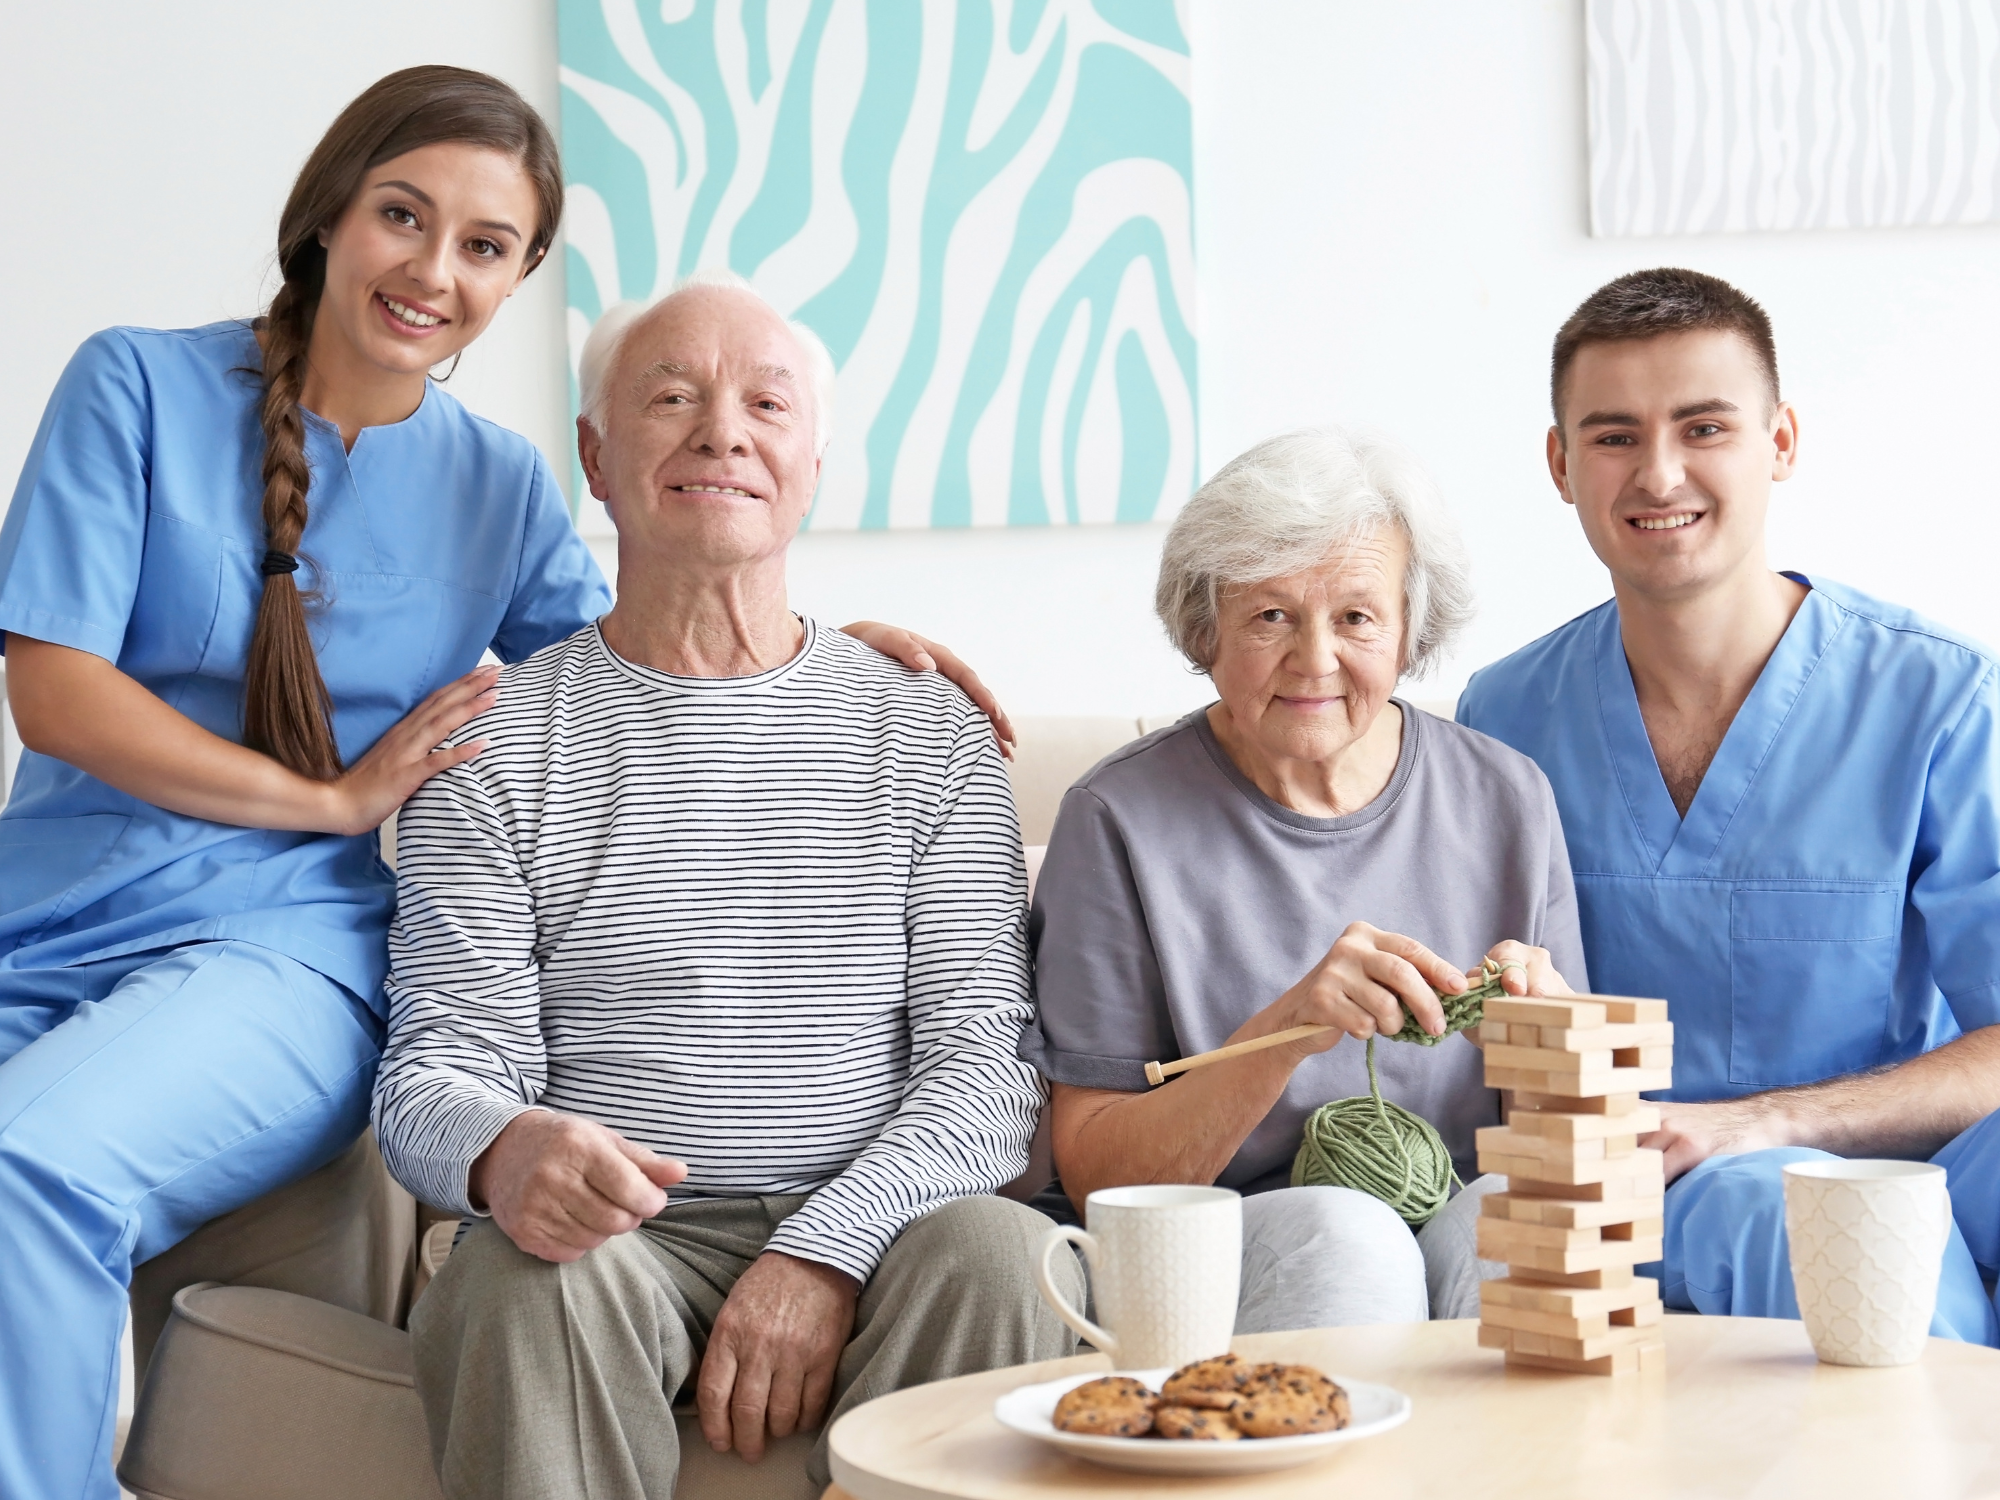 10 Steps to Finding the Right Home Care Agencies in Florida